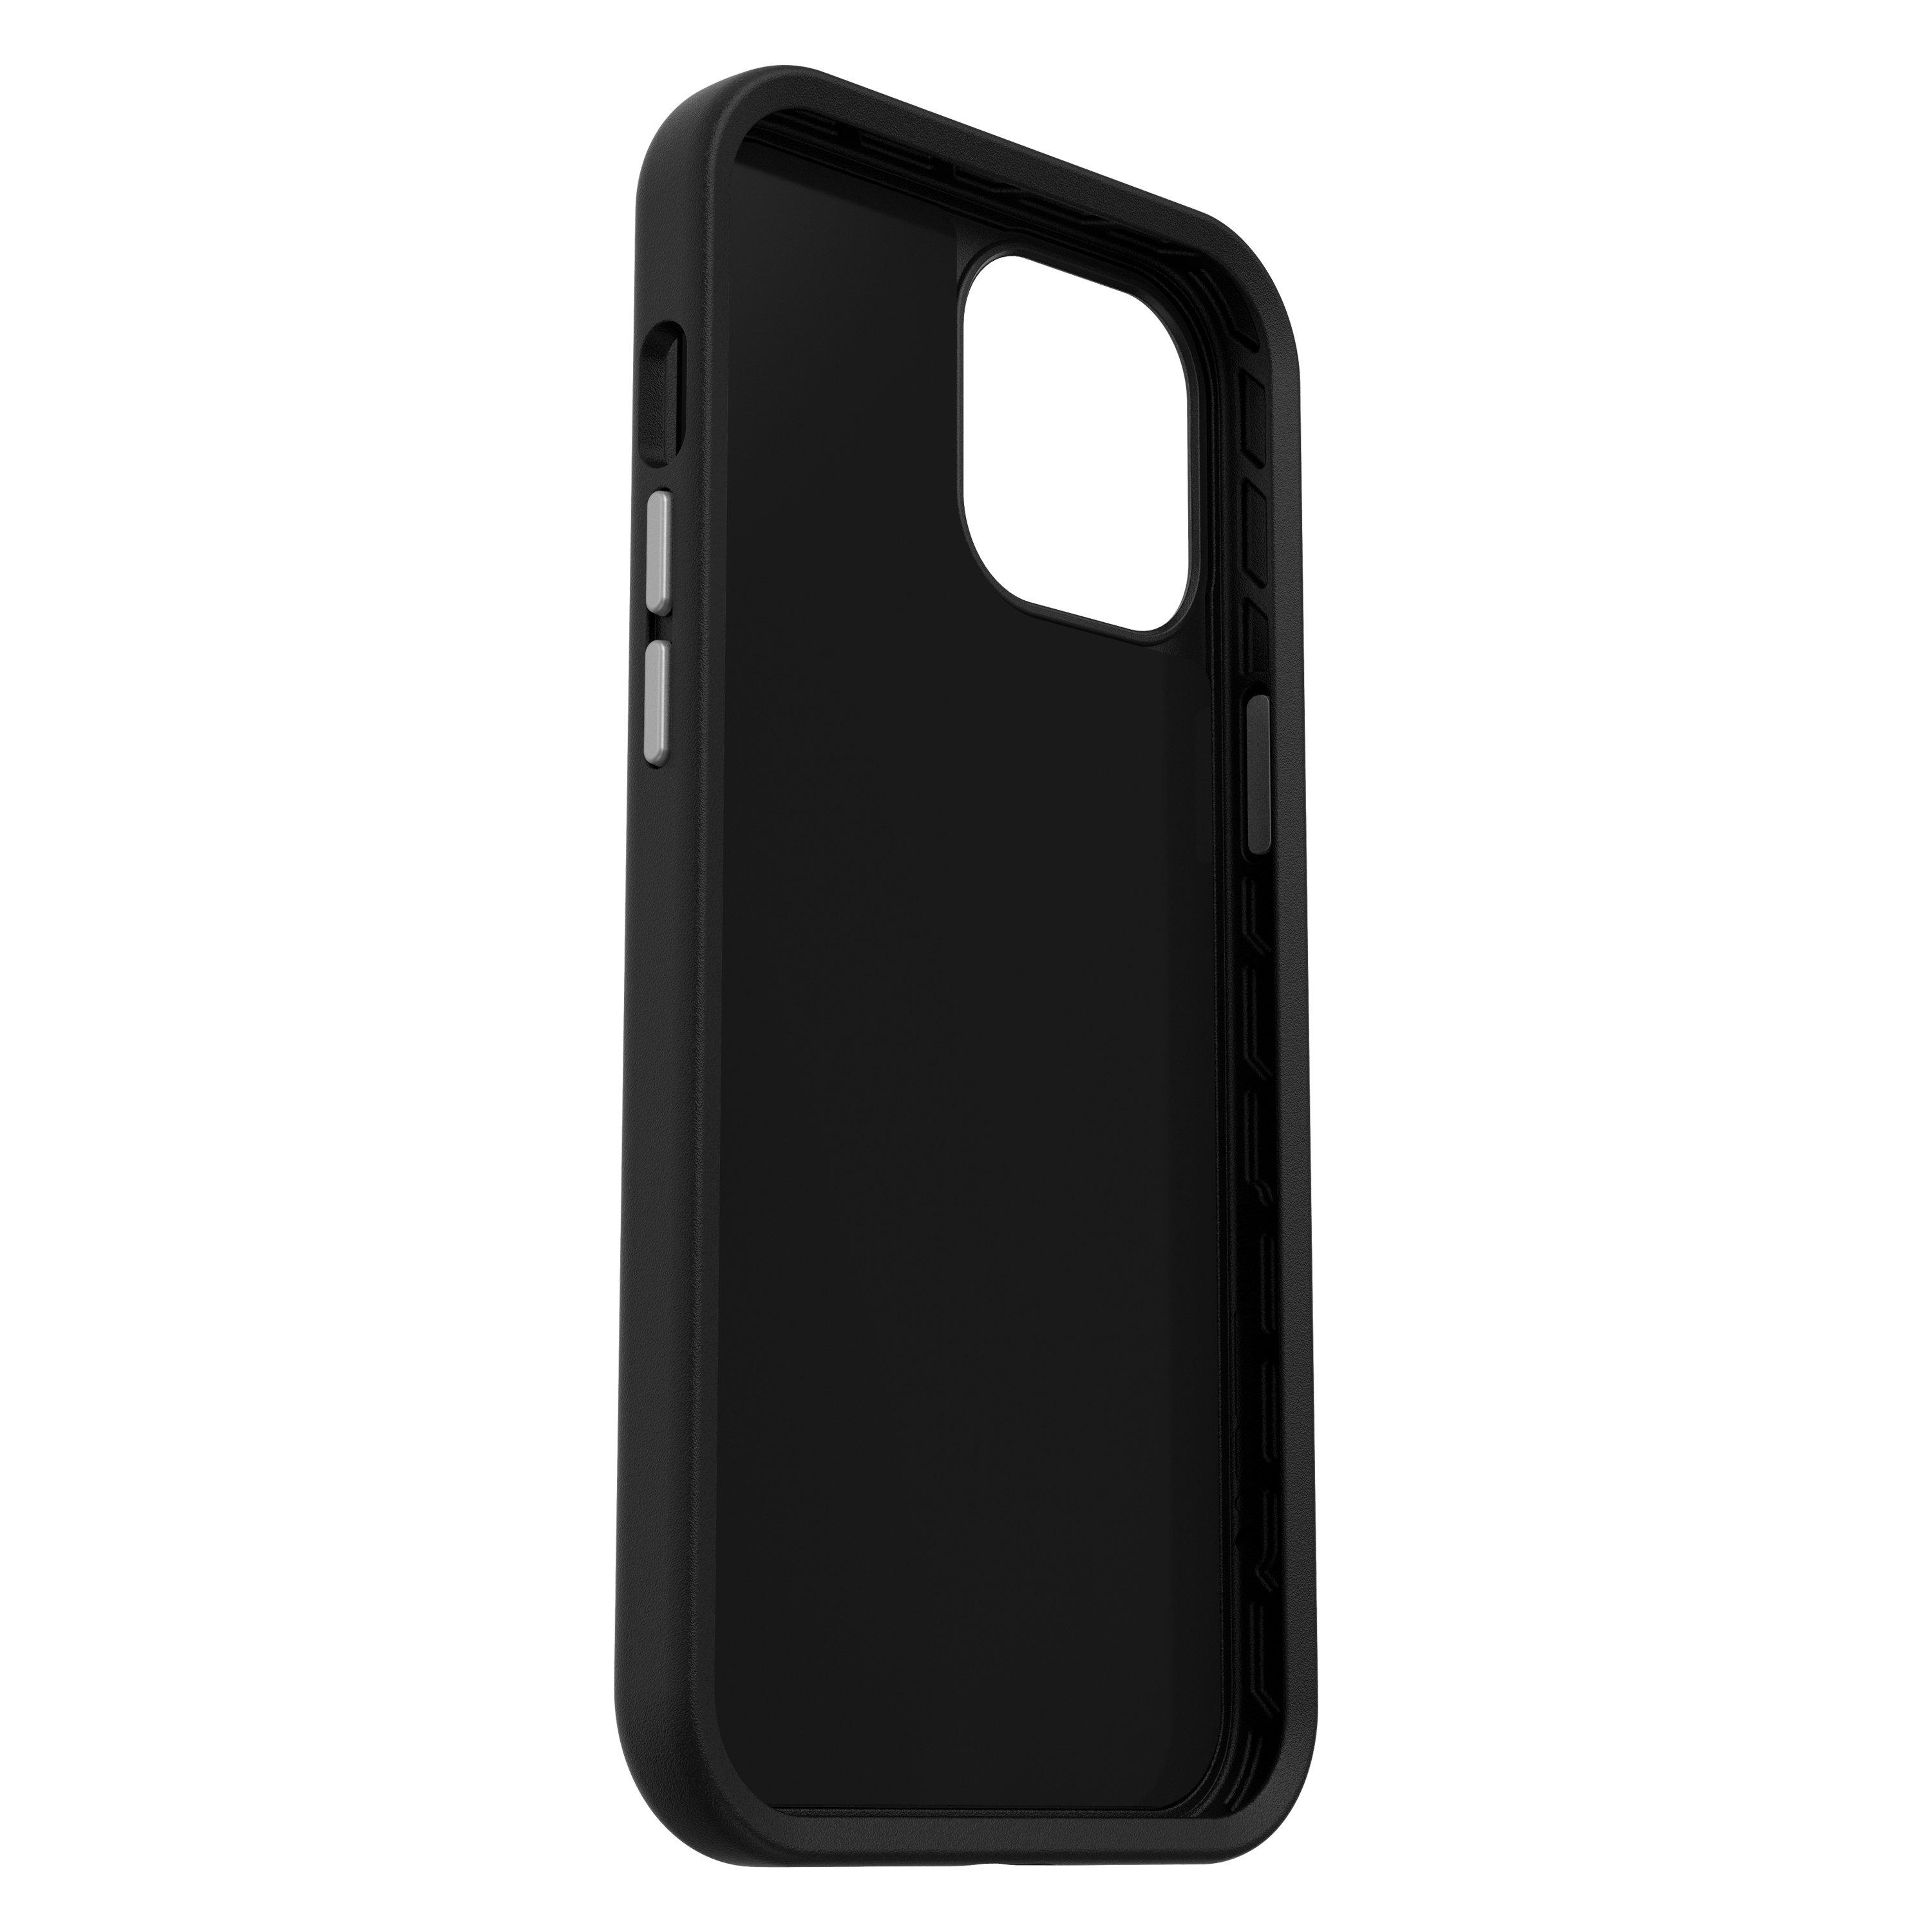 Otterbox Gaming Case For Iphone 12 Pro Max Gamestop